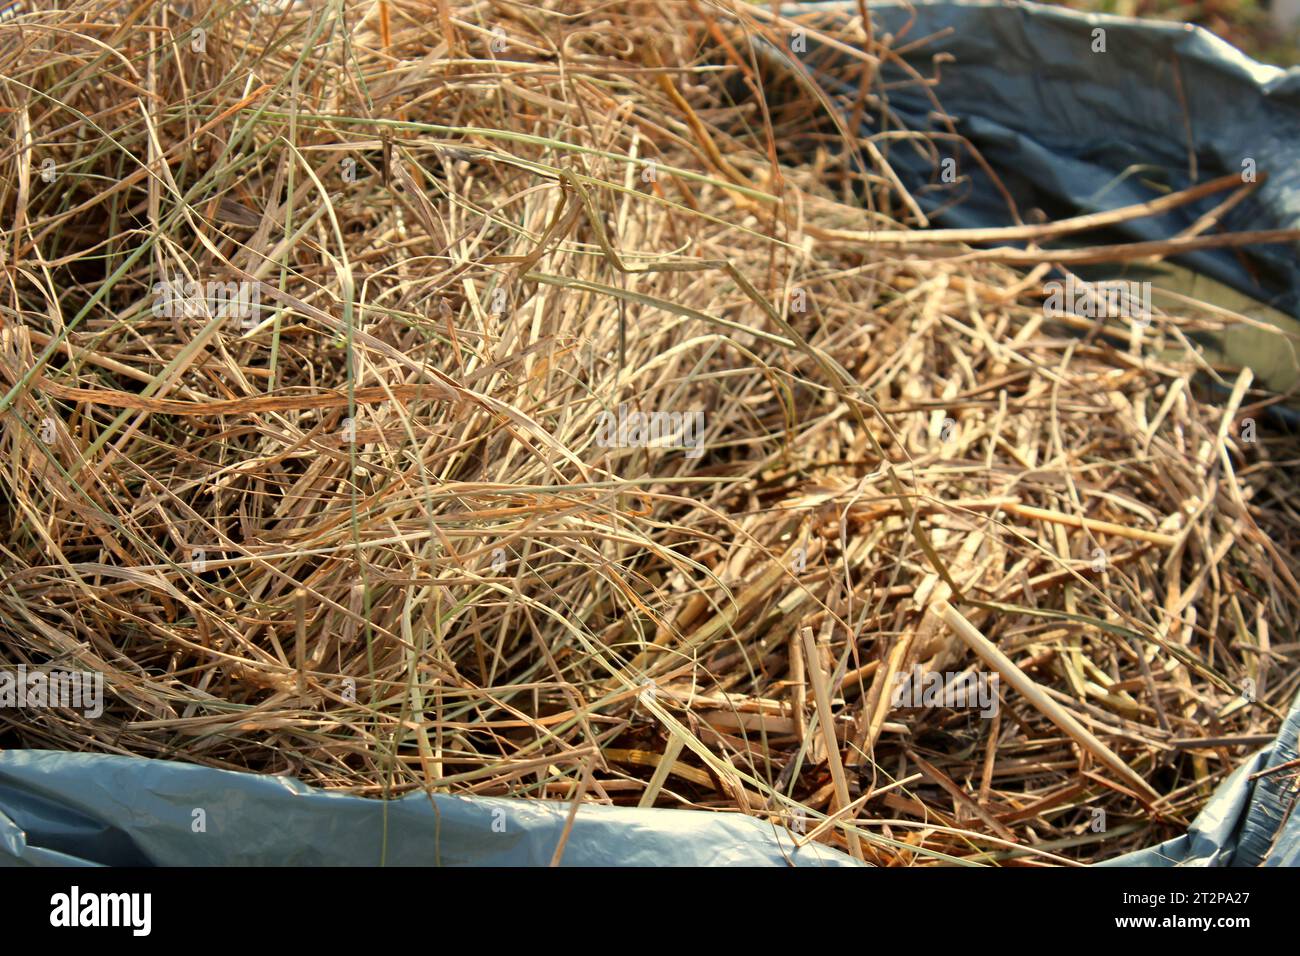 Hay, straw, or dry grass, used for covering, protecting and nourishing the soil, composting, animal feed and in bioconstruction. Stock Photo